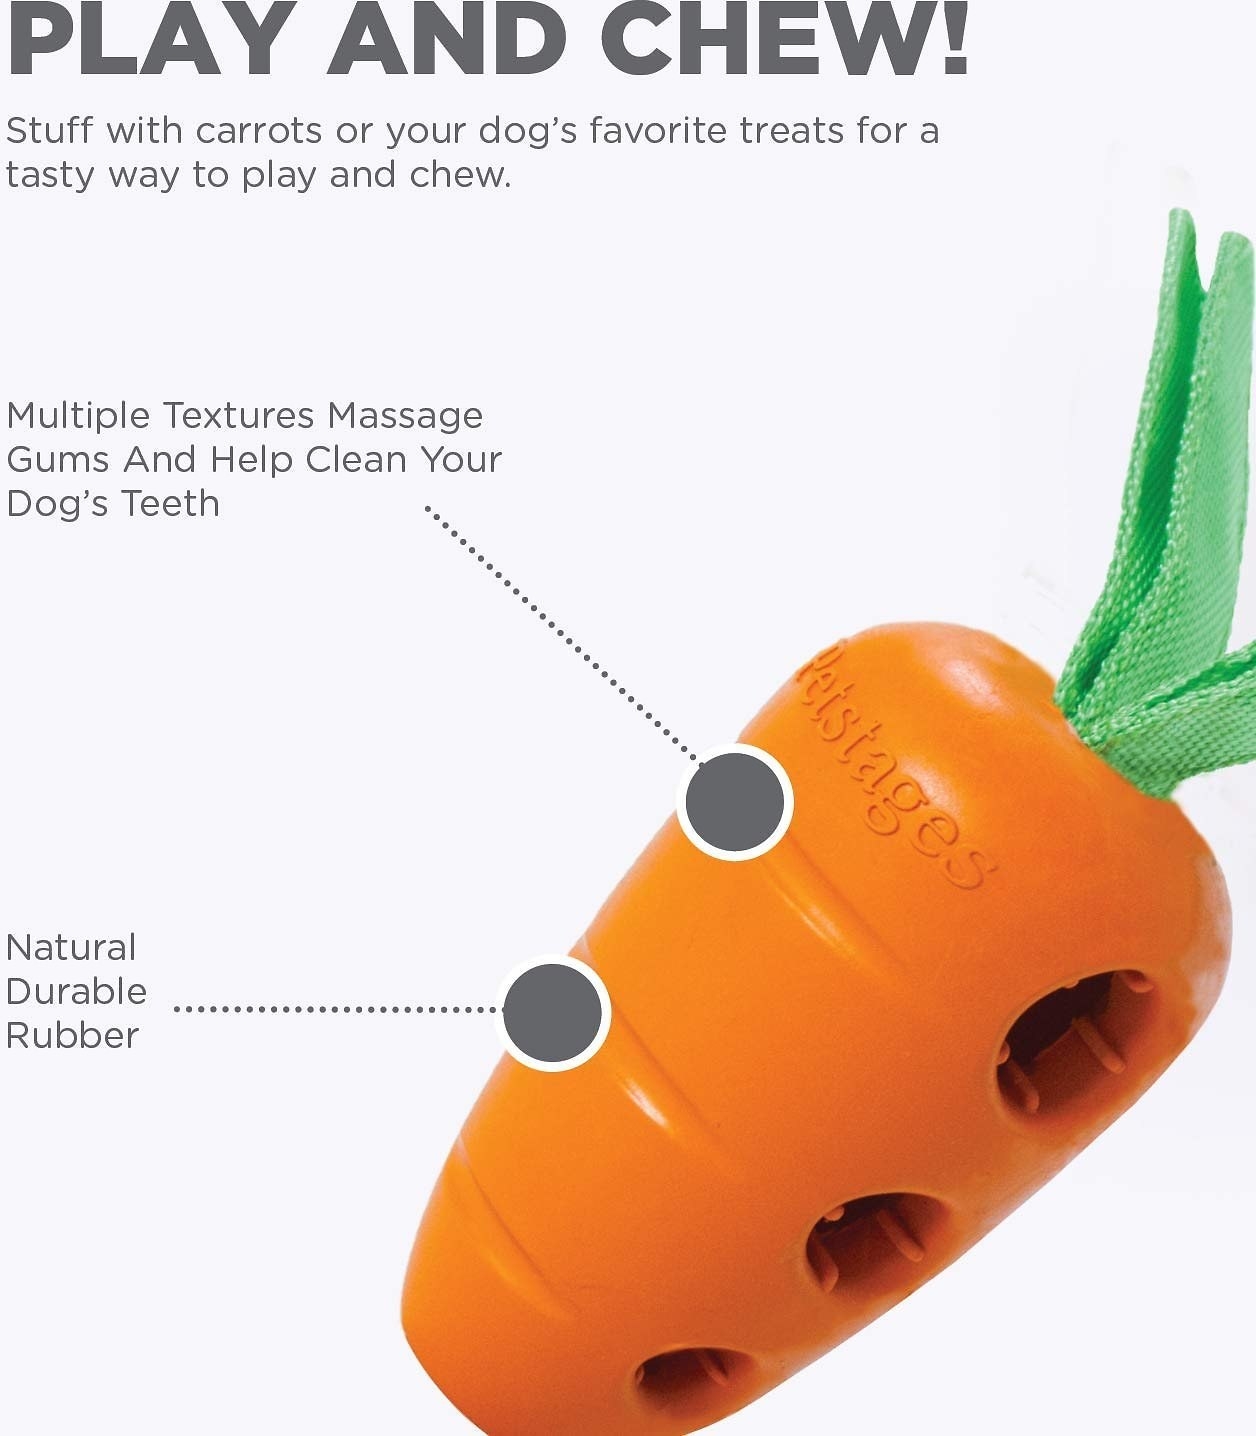 carrot with ridges and three holes for treats